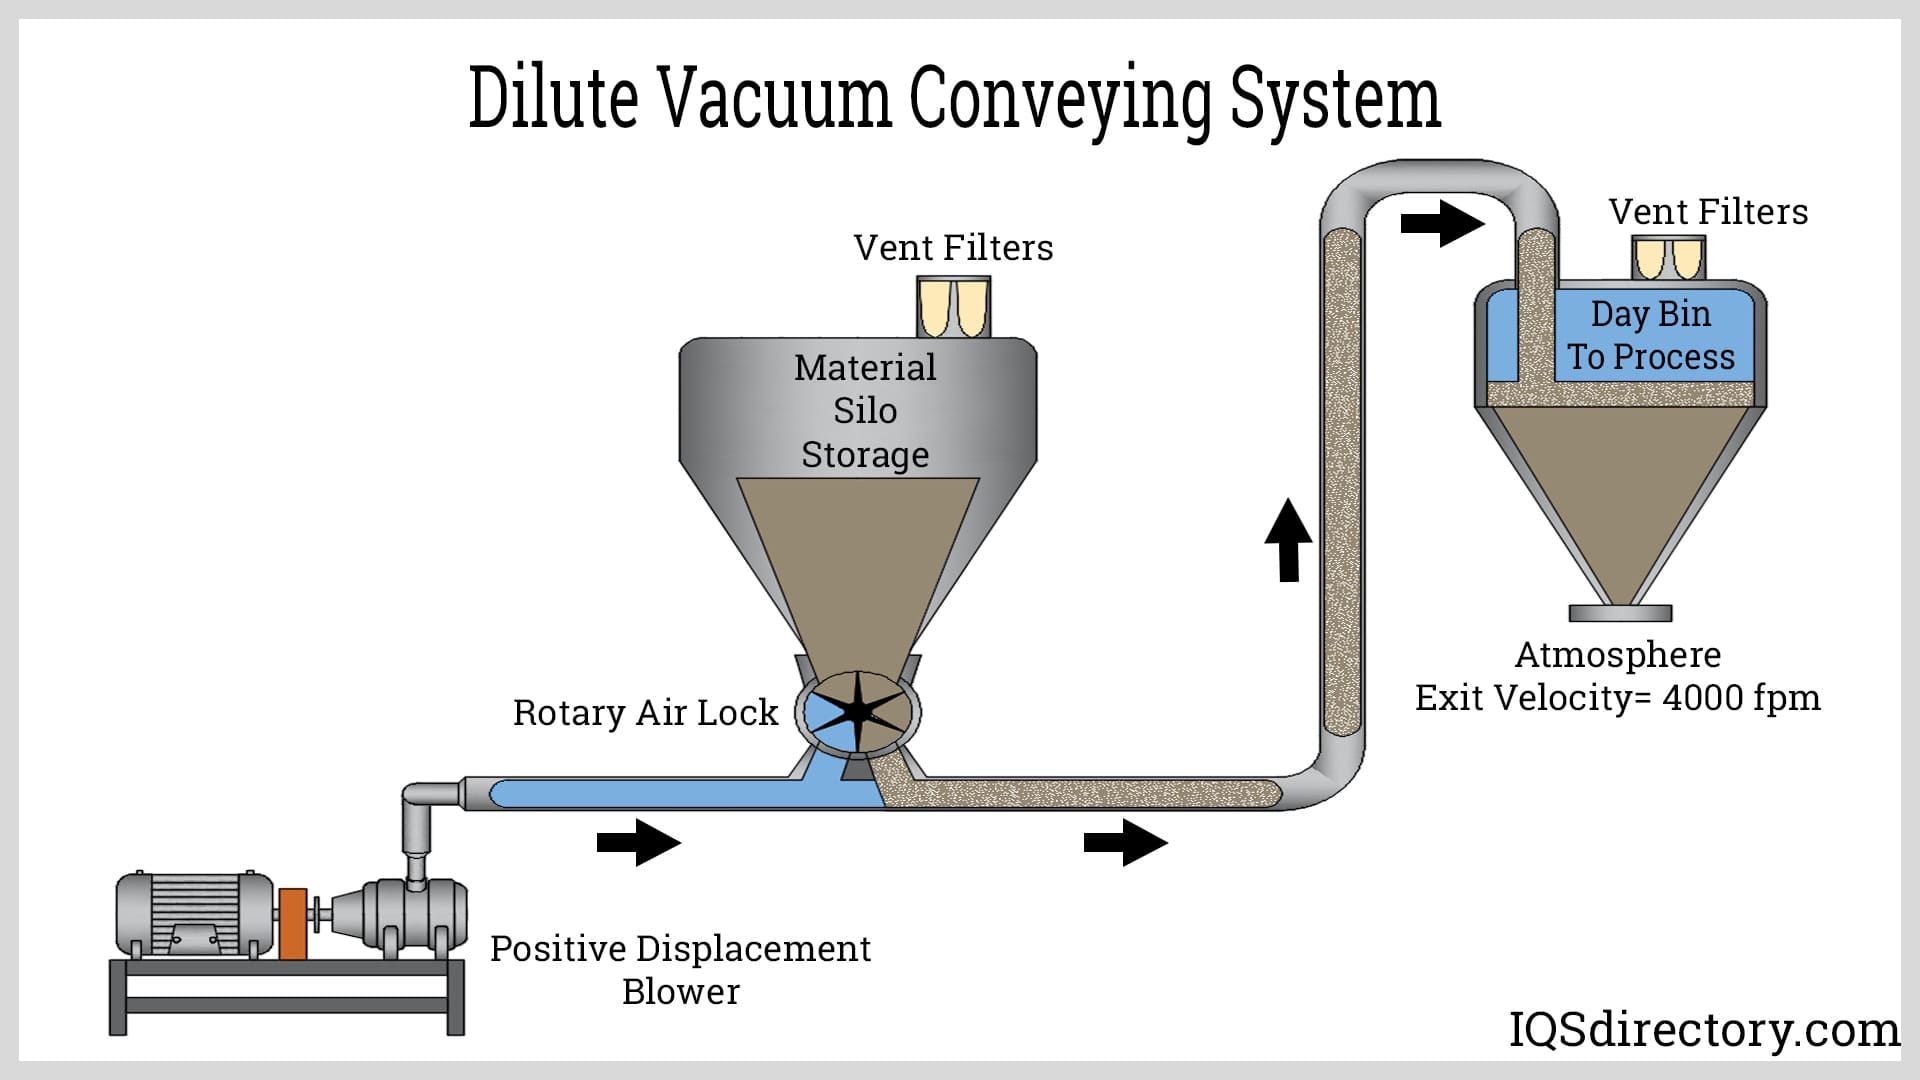 Dilute Vacuum Conveying System